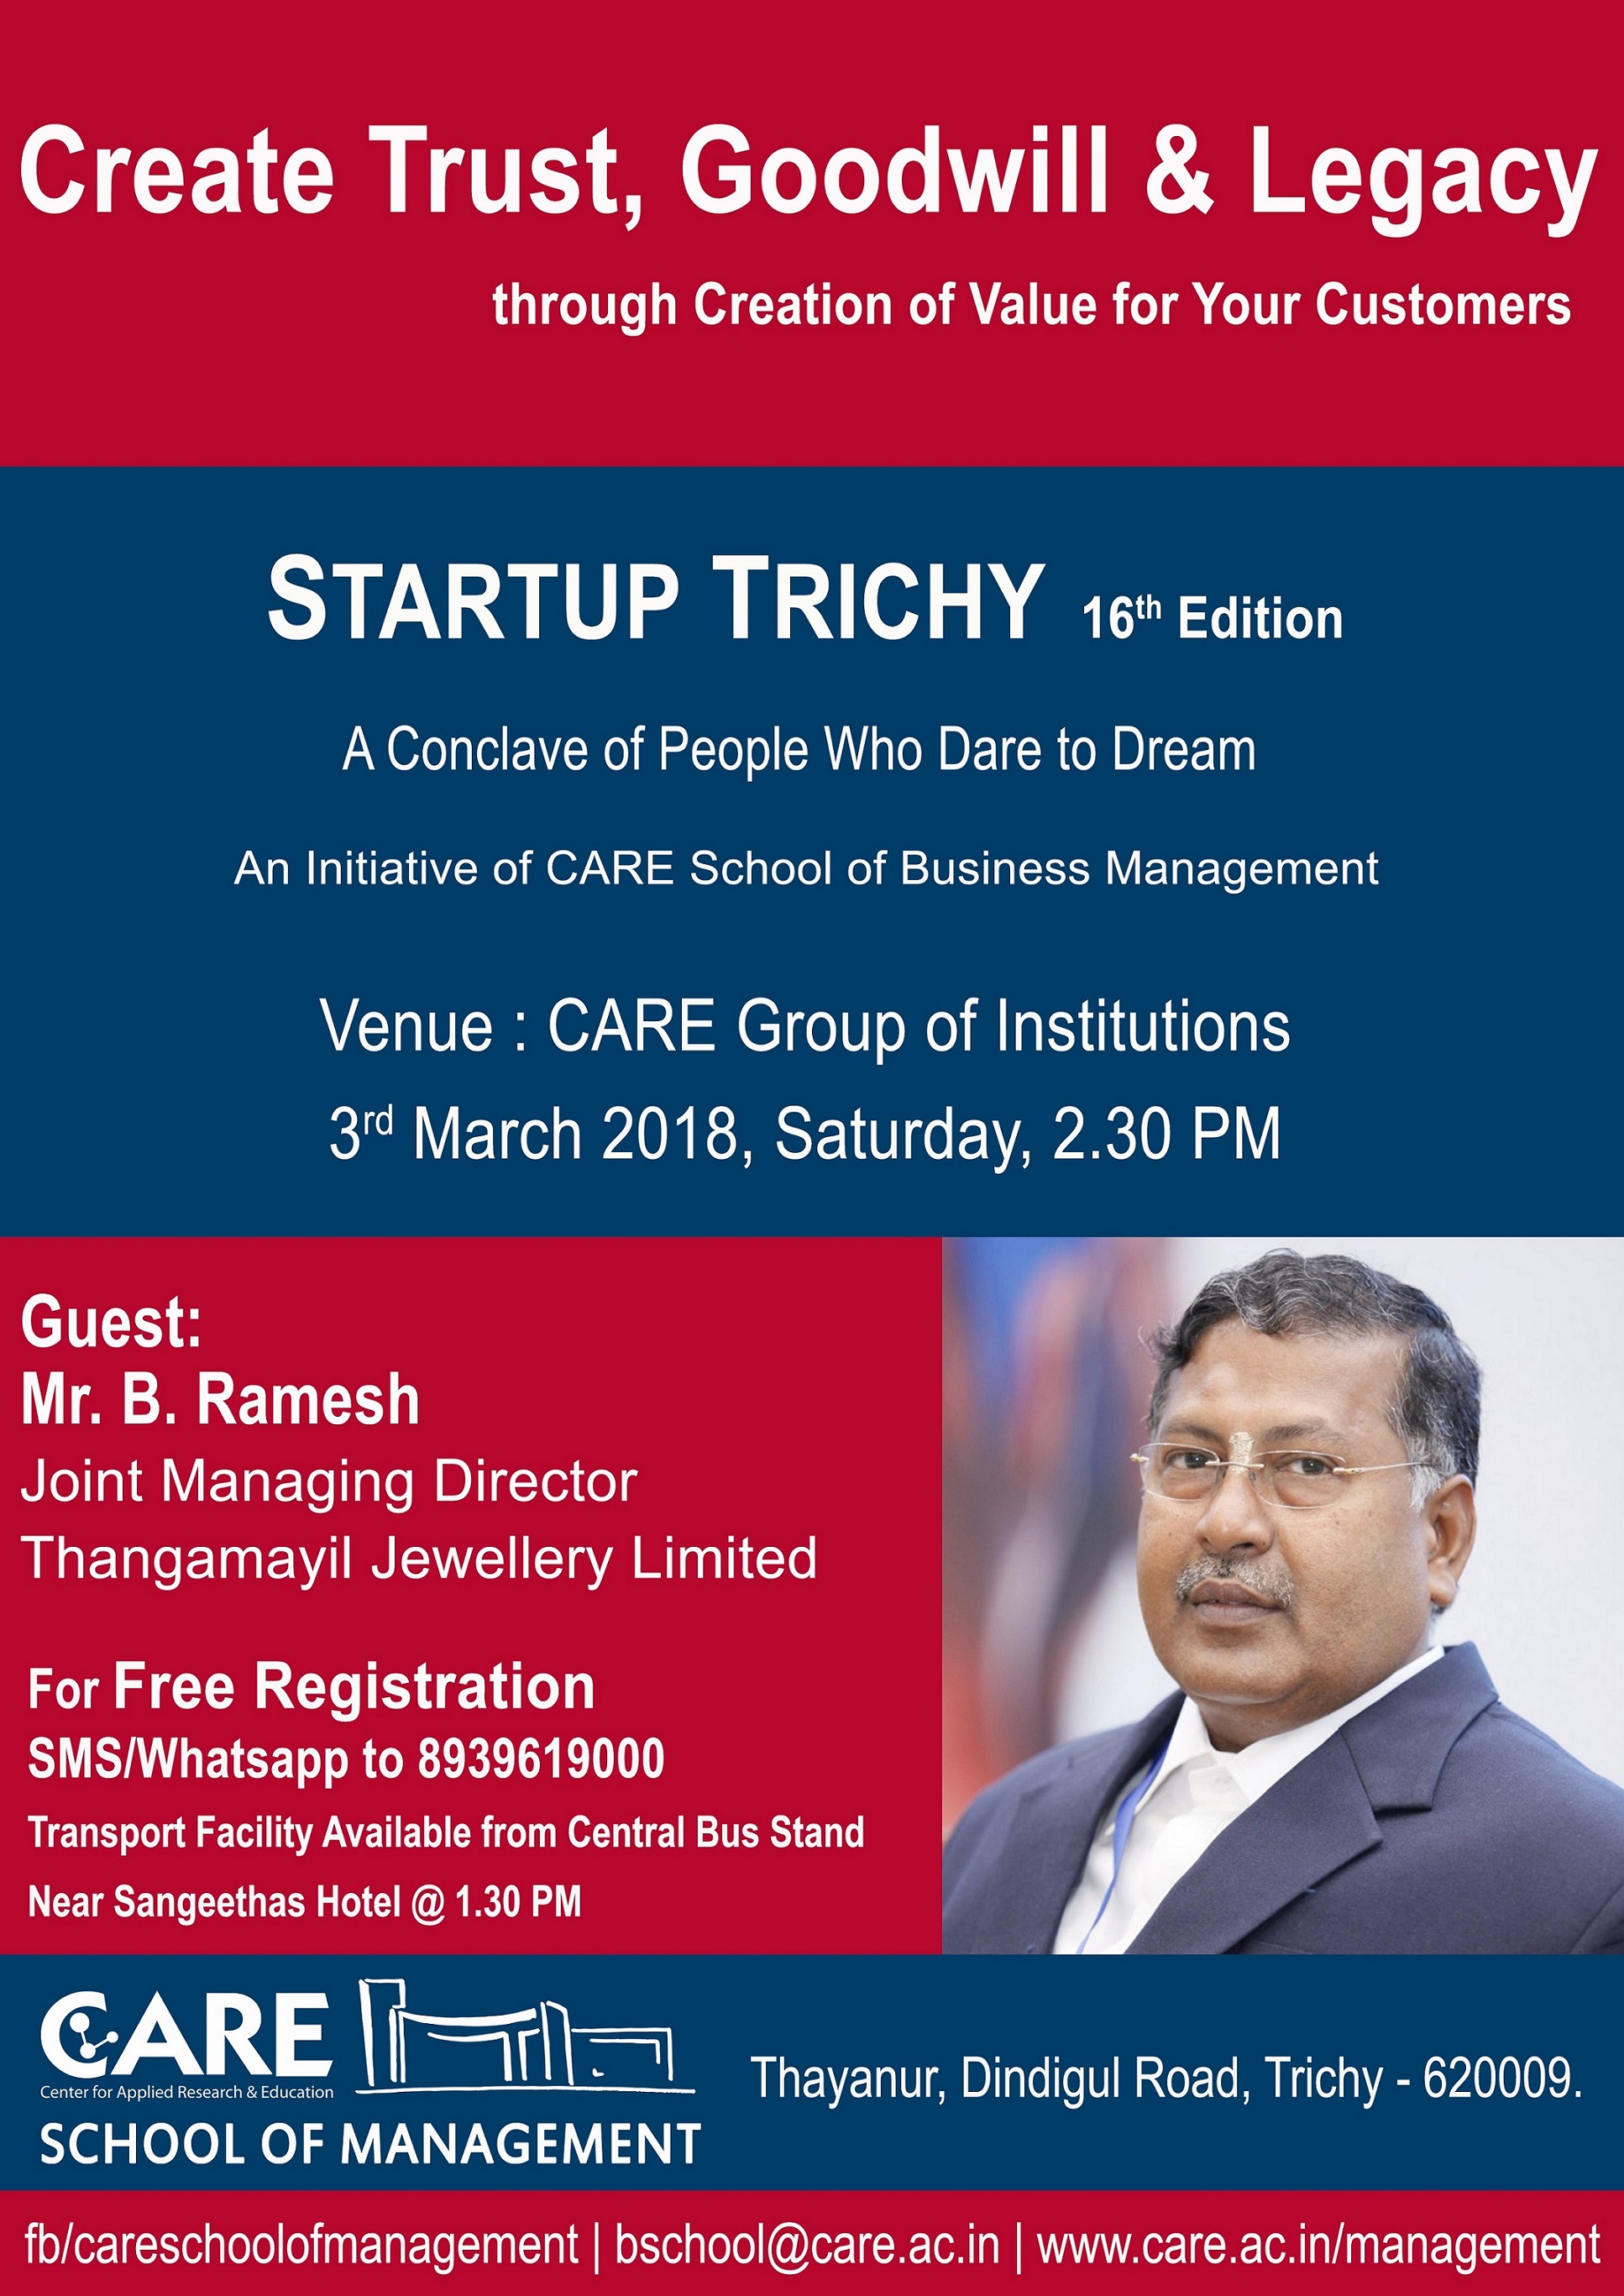 Start Up Trichy 16th Edition